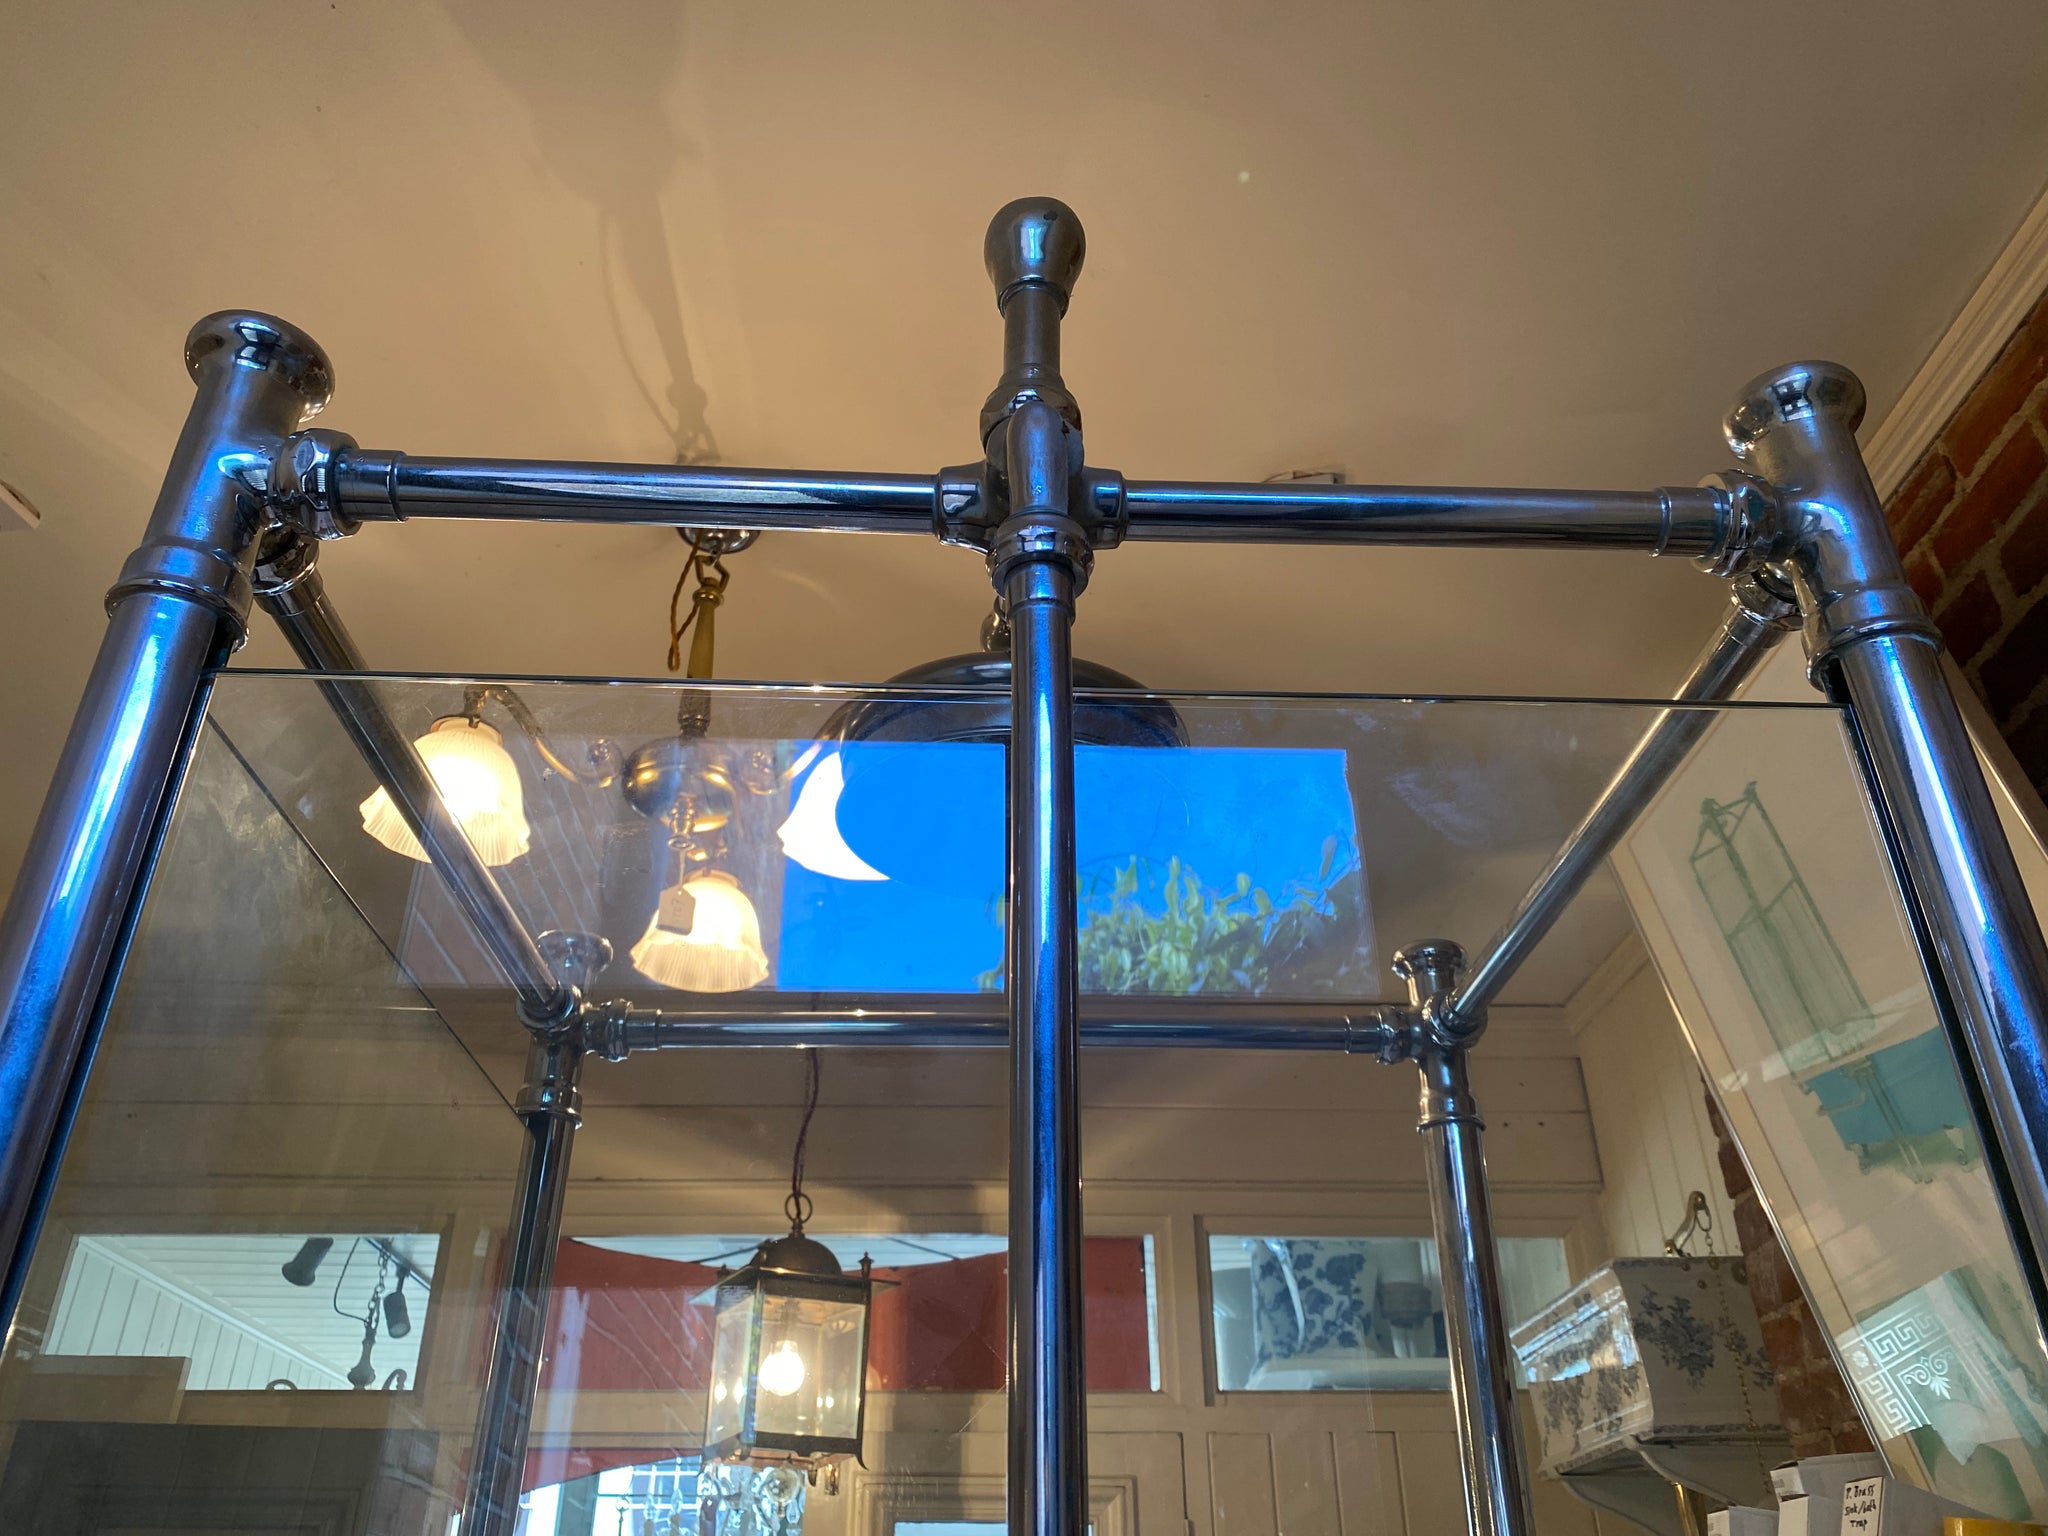 1930's cast iron shower bath with glass screens and chrome plated brassware